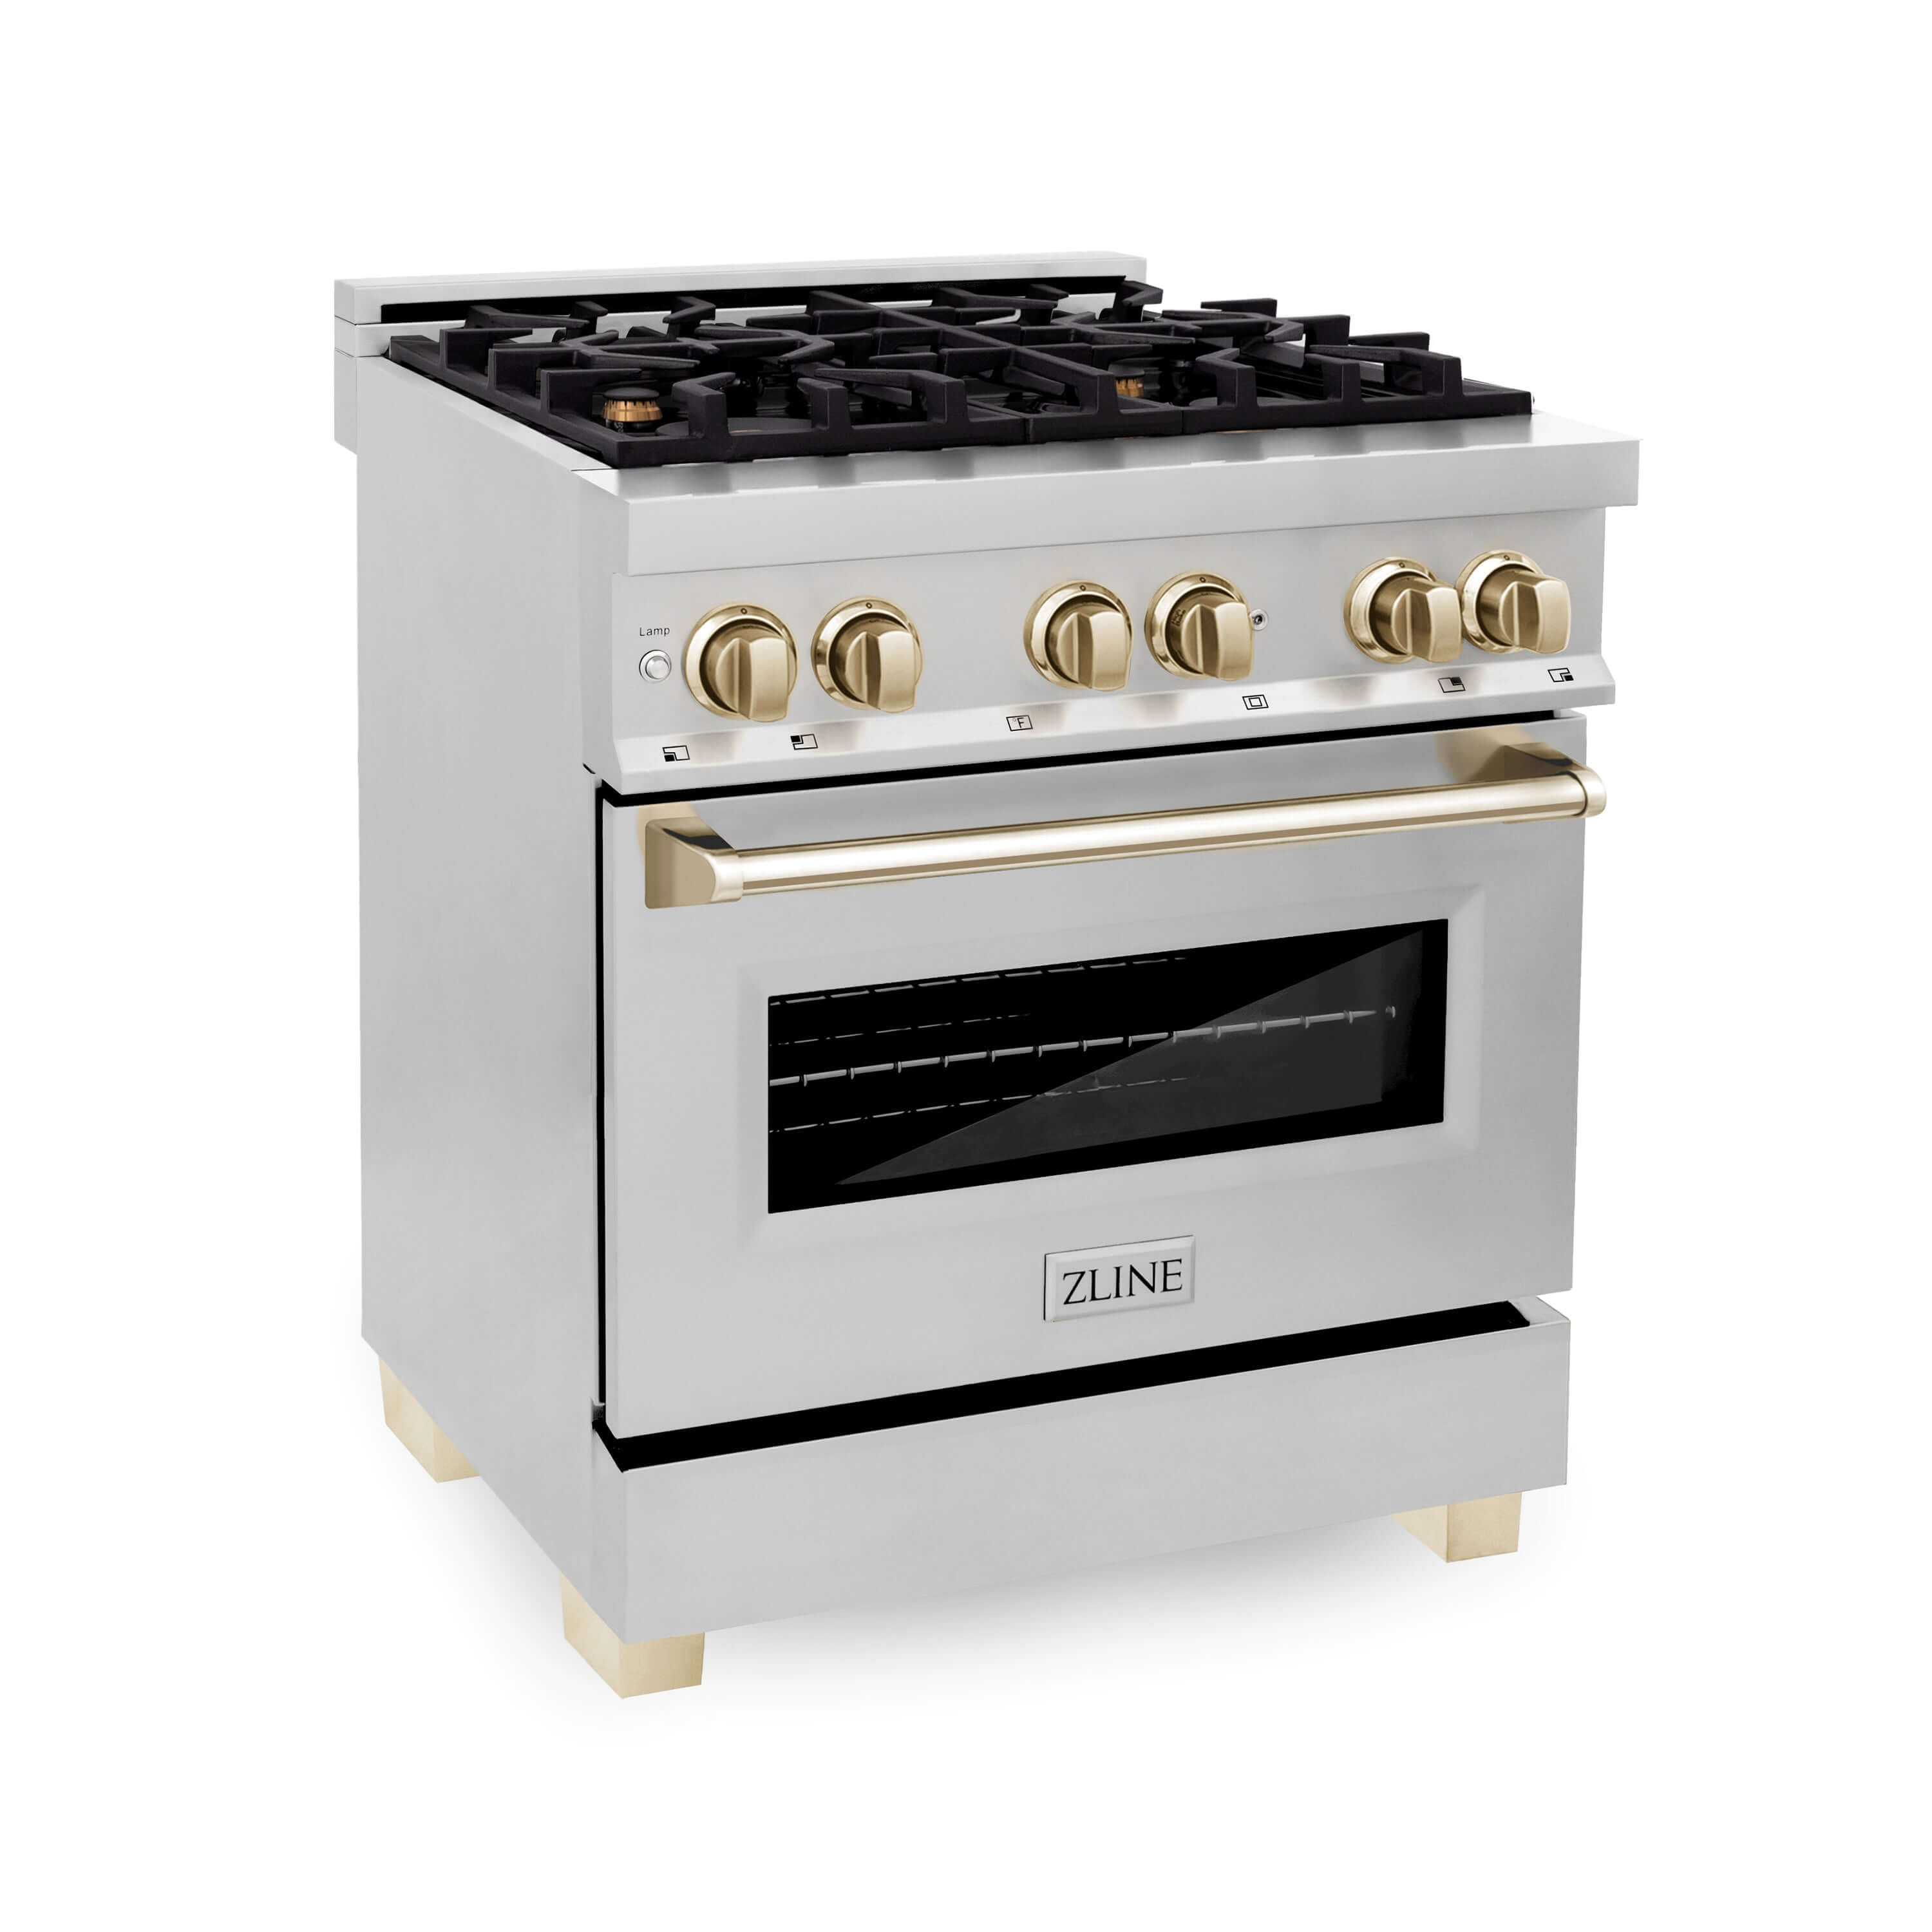 ZLINE Autograph Edition 30 in. 4.0 cu. ft. Dual Fuel Range with Gas Stove and Electric Oven in Stainless Steel with Gold Accents (RAZ-30) Included in Kitchen Package